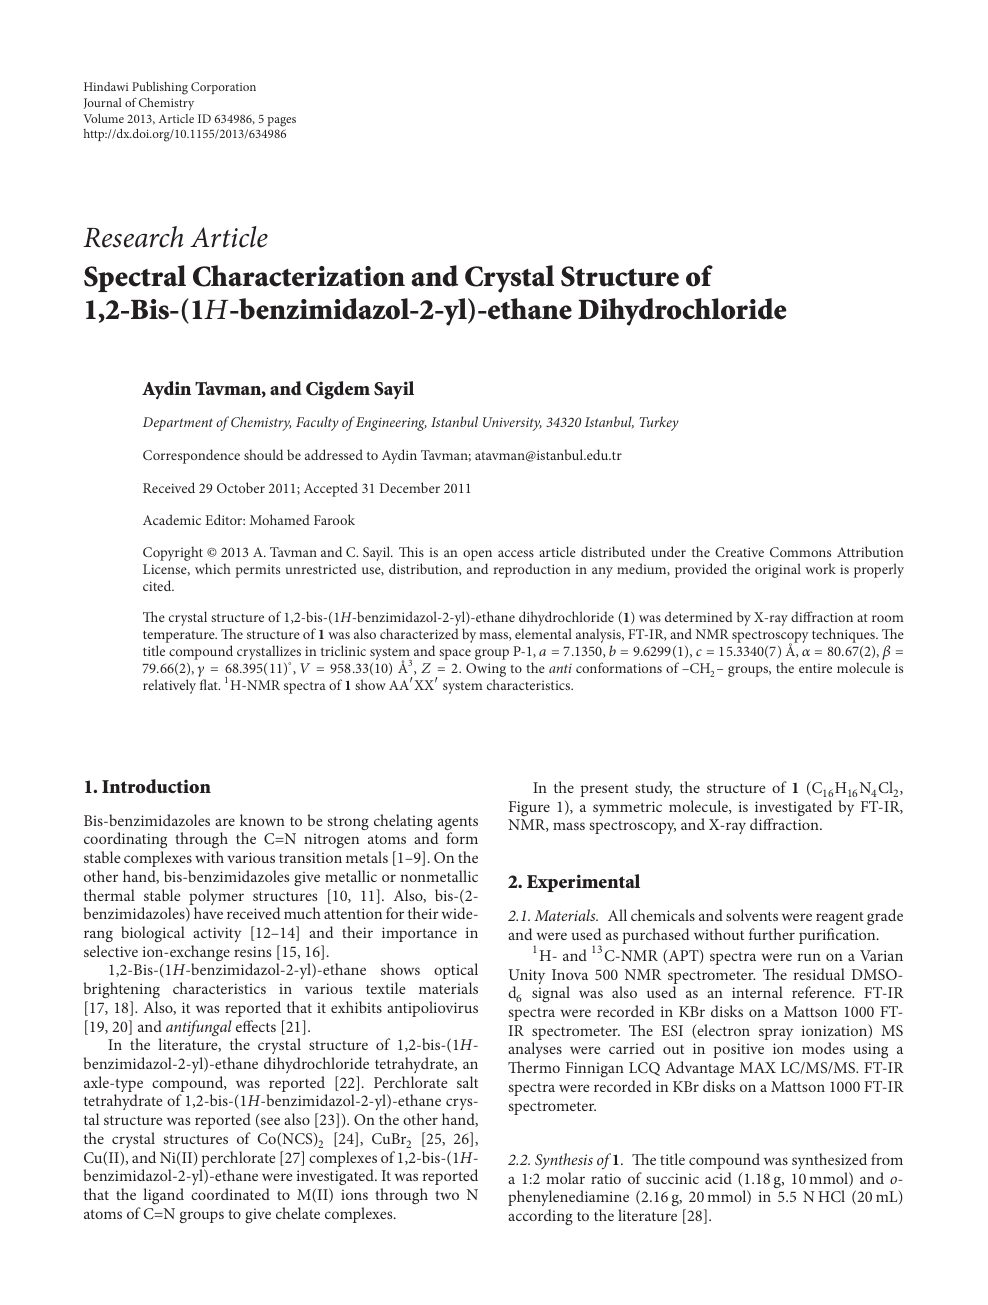 Spectral Characterization And Crystal Structure Of 1 2 Bis 1h Benzimidazol 2 Yl Ethane Dihydrochloride Topic Of Research Paper In Chemical Sciences Download Scholarly Article Pdf And Read For Free On Cyberleninka Open Science Hub